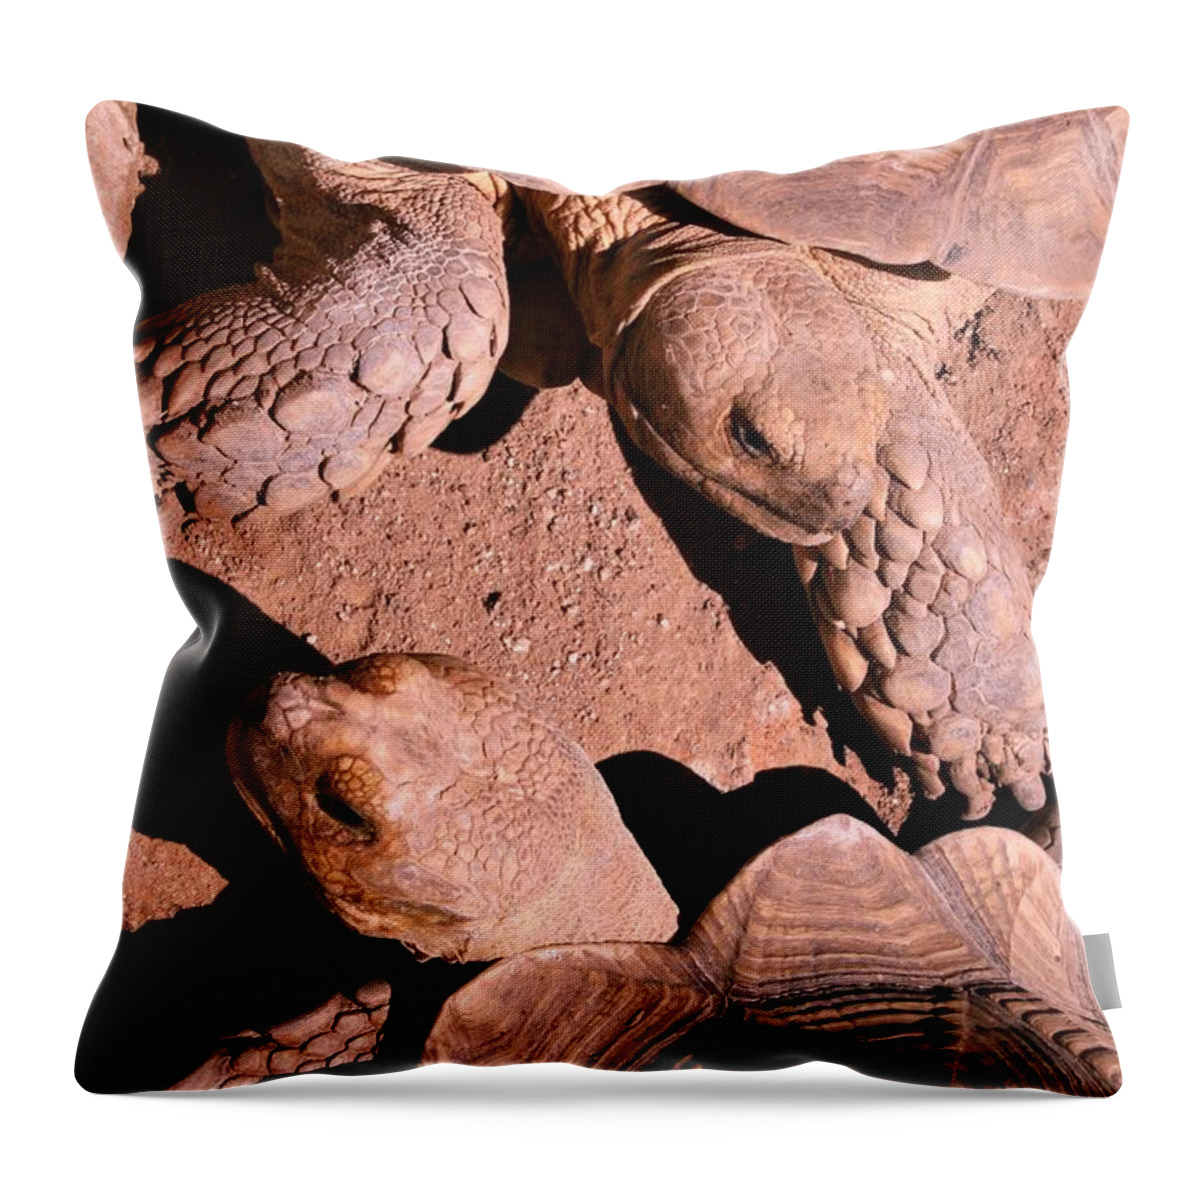 Reptiles Throw Pillow featuring the photograph Living Pods by Mary Mikawoz